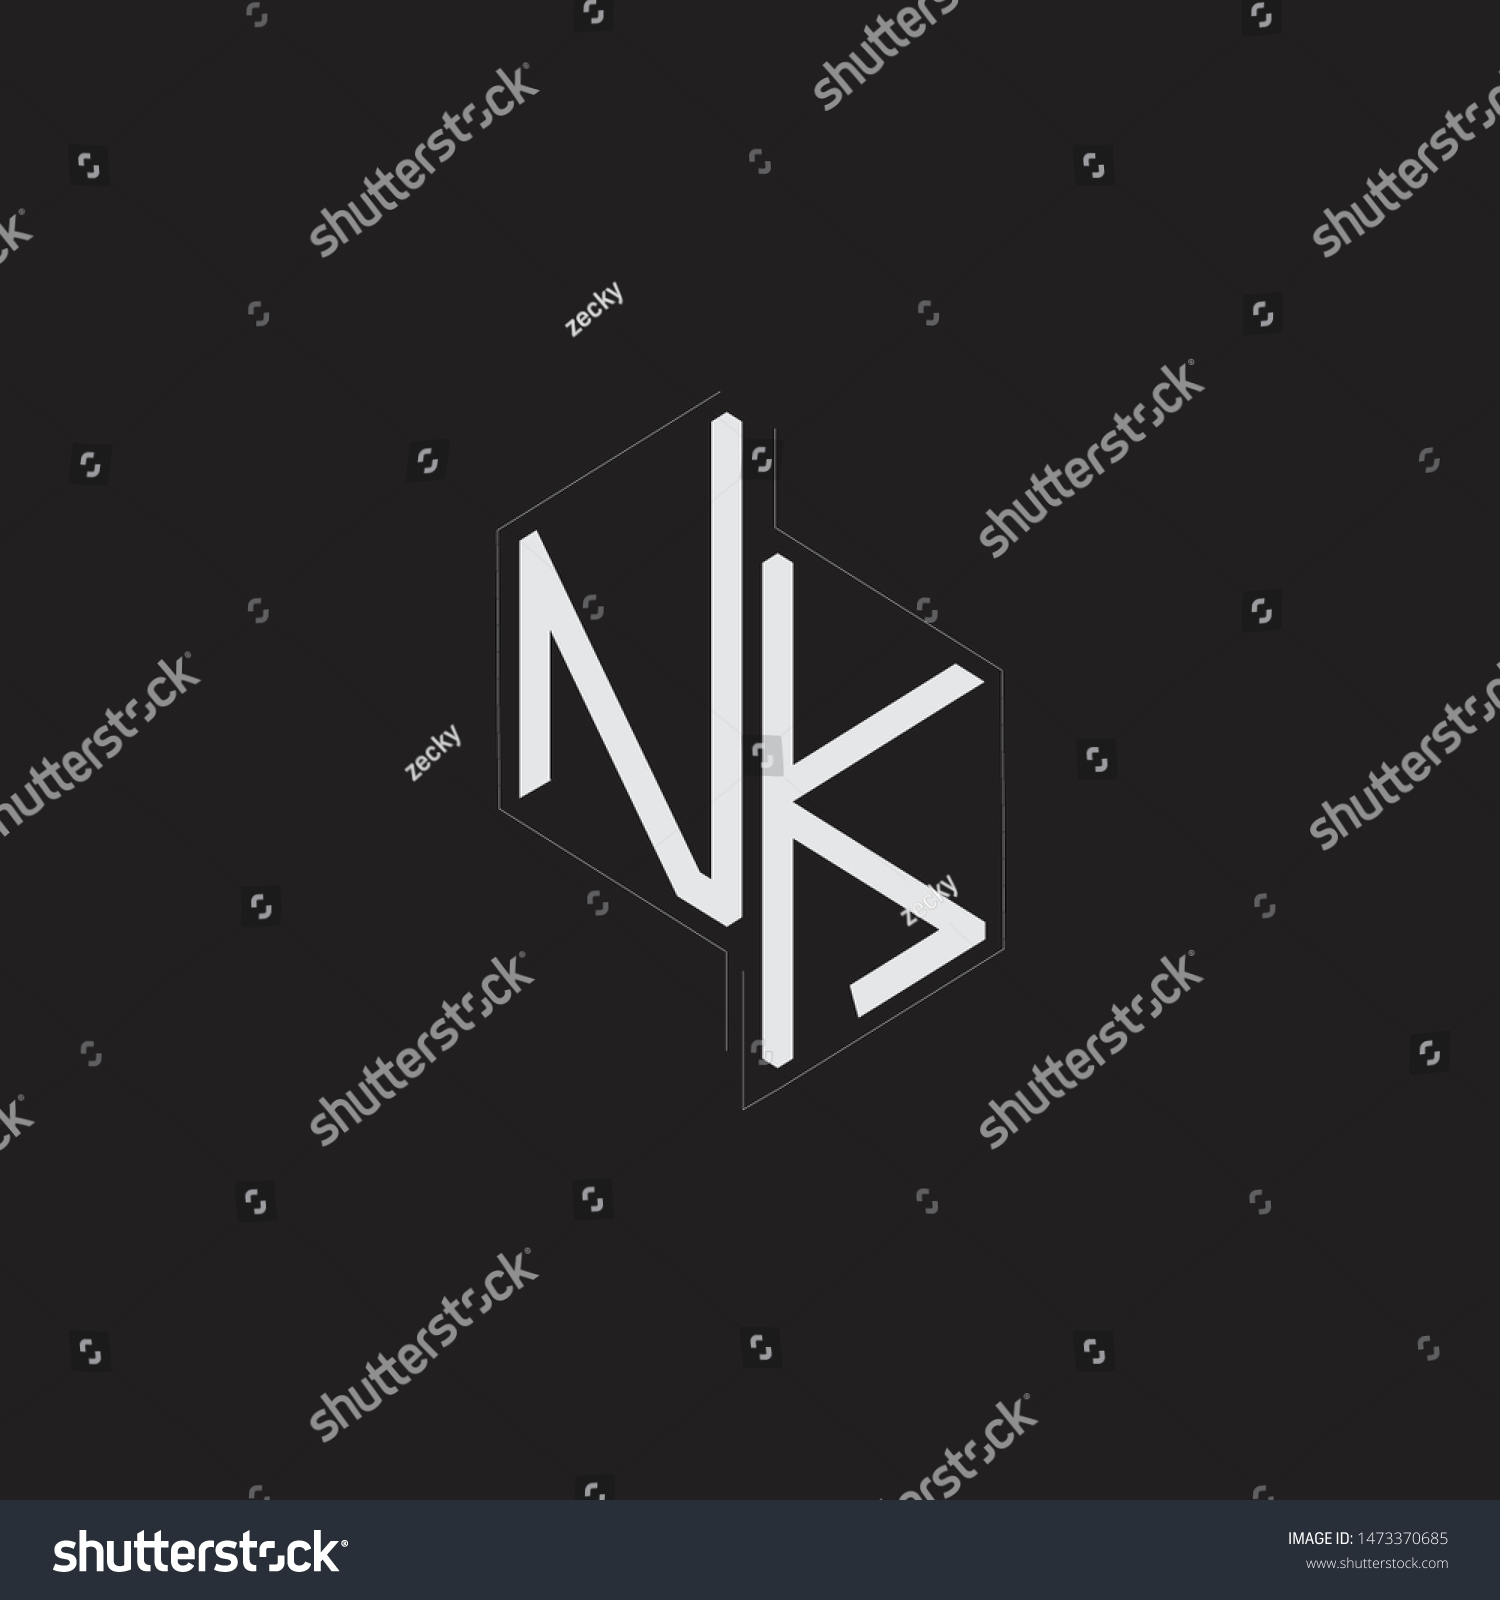 Nk Initial Letters Logo Monogram Down Stock Vector Royalty Free